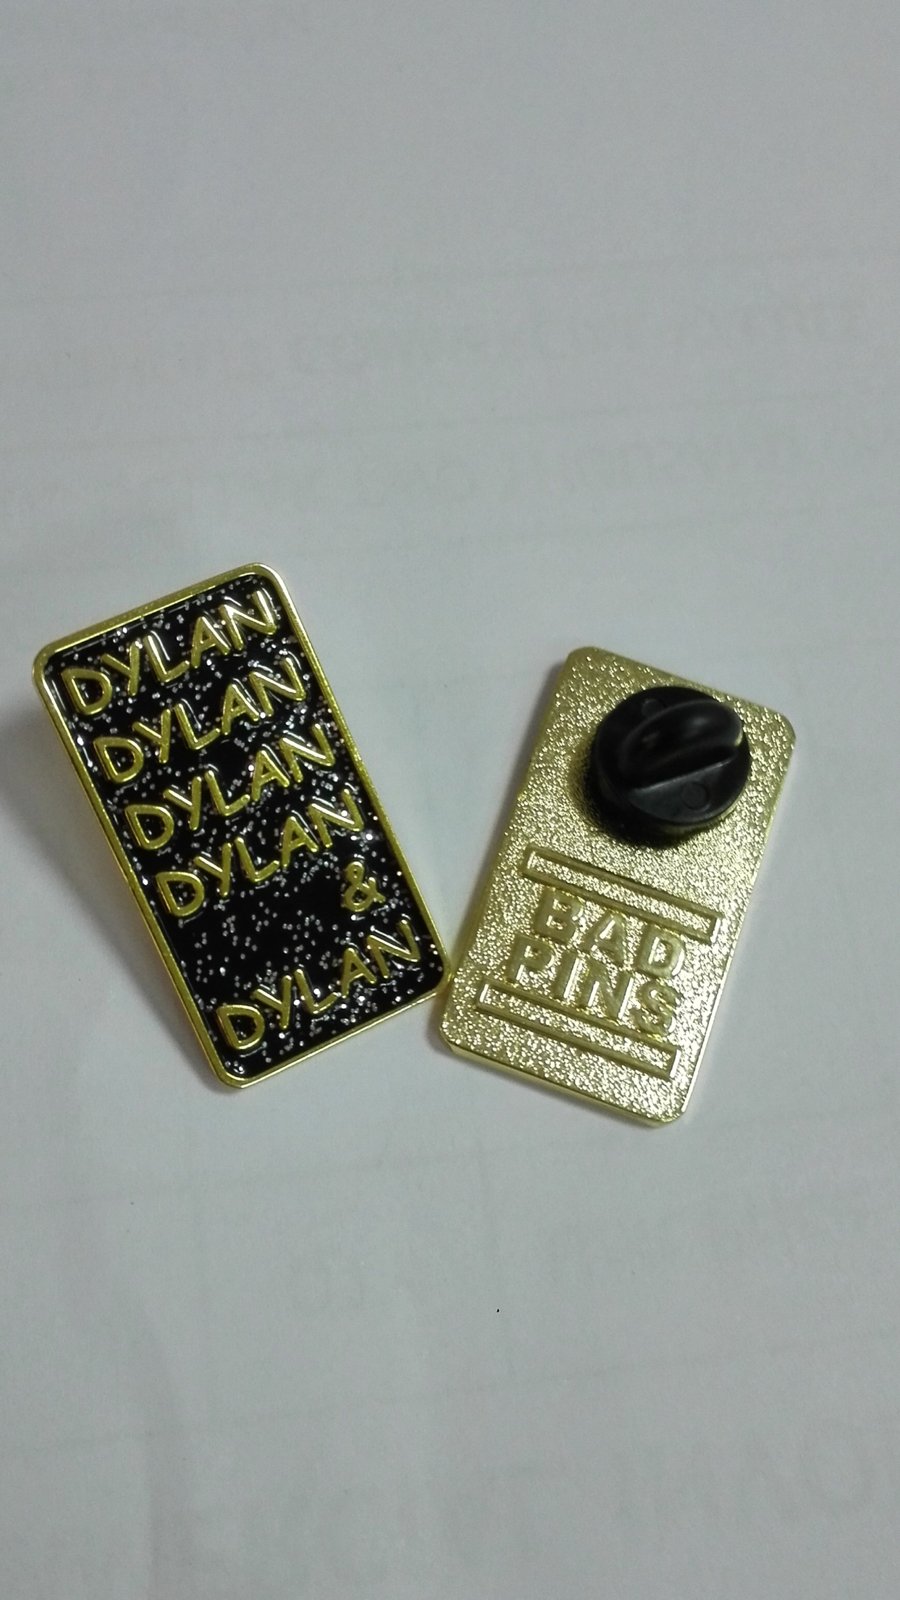 'Best Rapper Of All Time' Lapel Pin